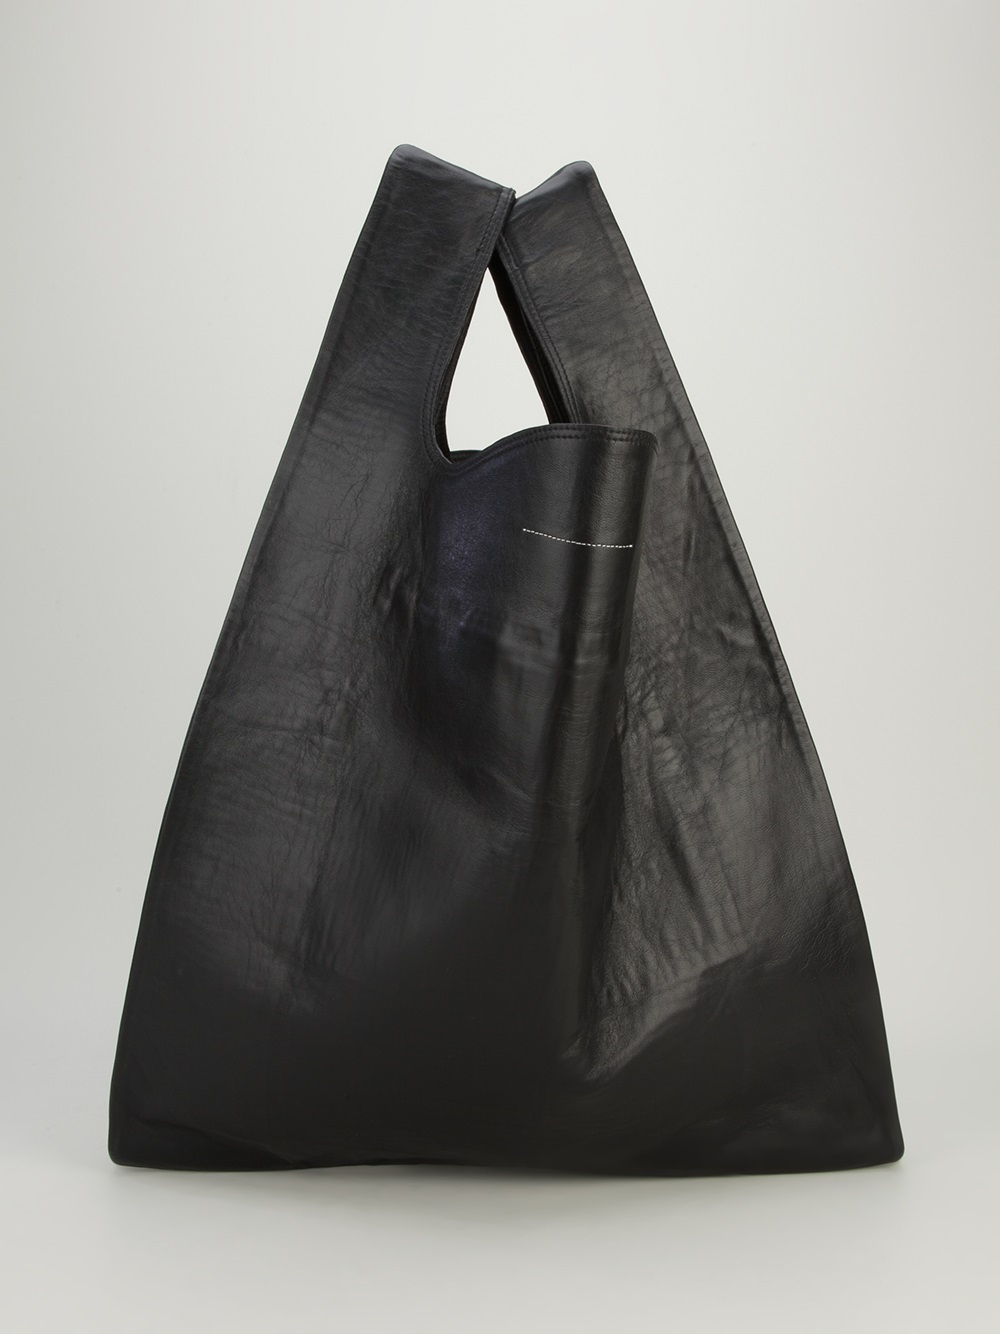 Lyst - Mm6 By Maison Martin Margiela Tote Bag in Black